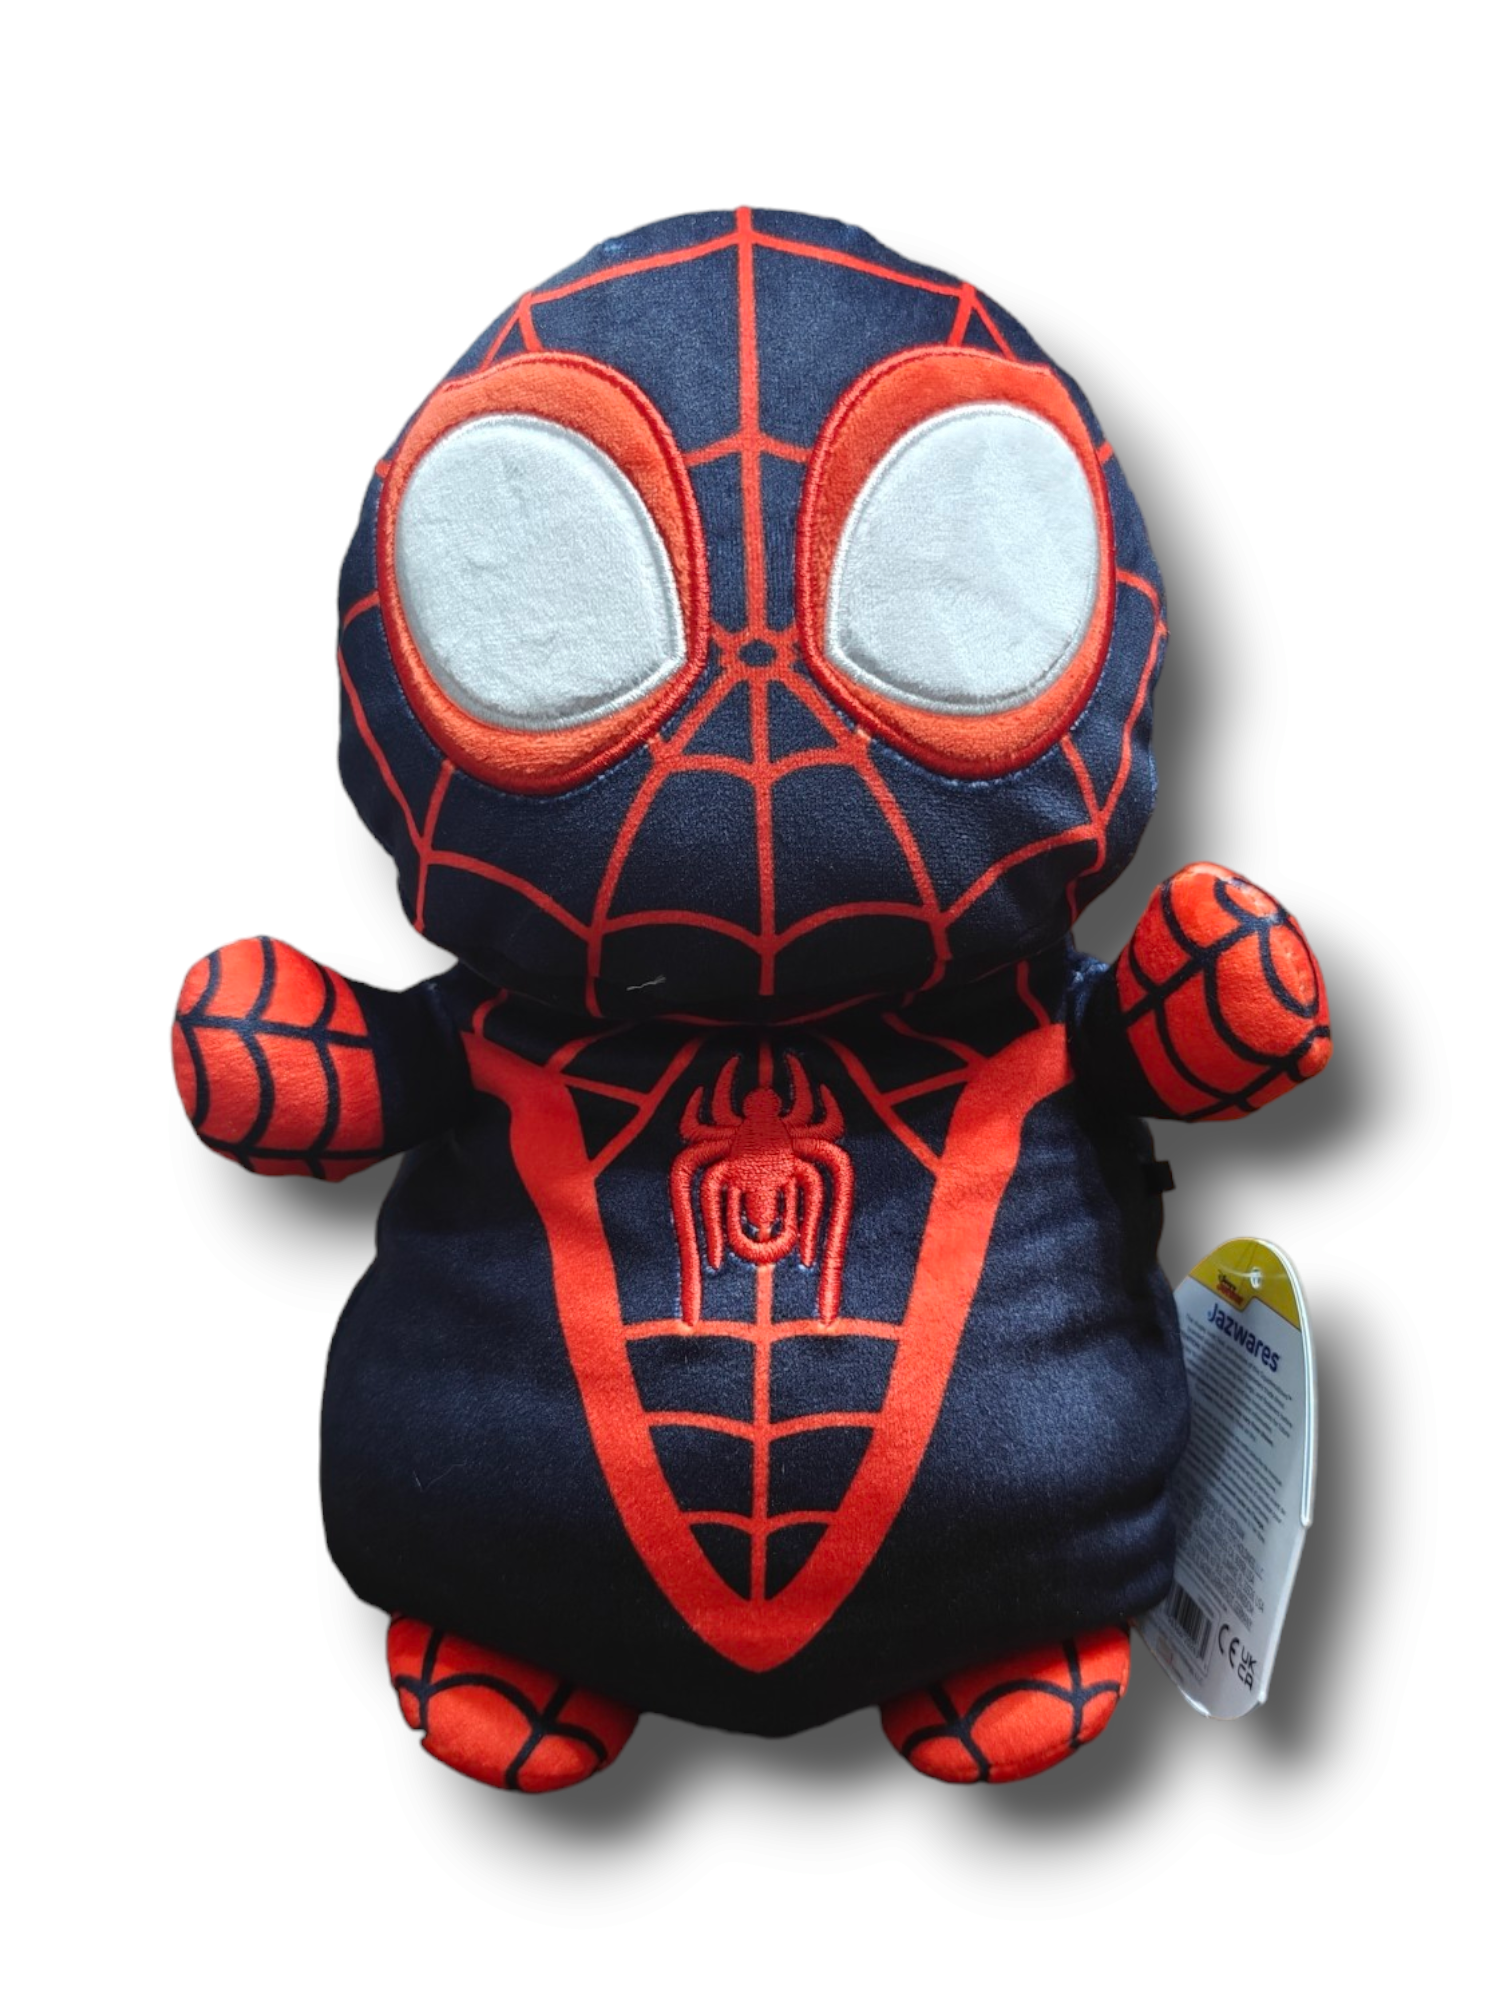 Marvel's Miles Morales 10" Spiderman Squishmallow HugMee - Collectible, Ultra-Soft Plush for All Ages - Ricky's Garage